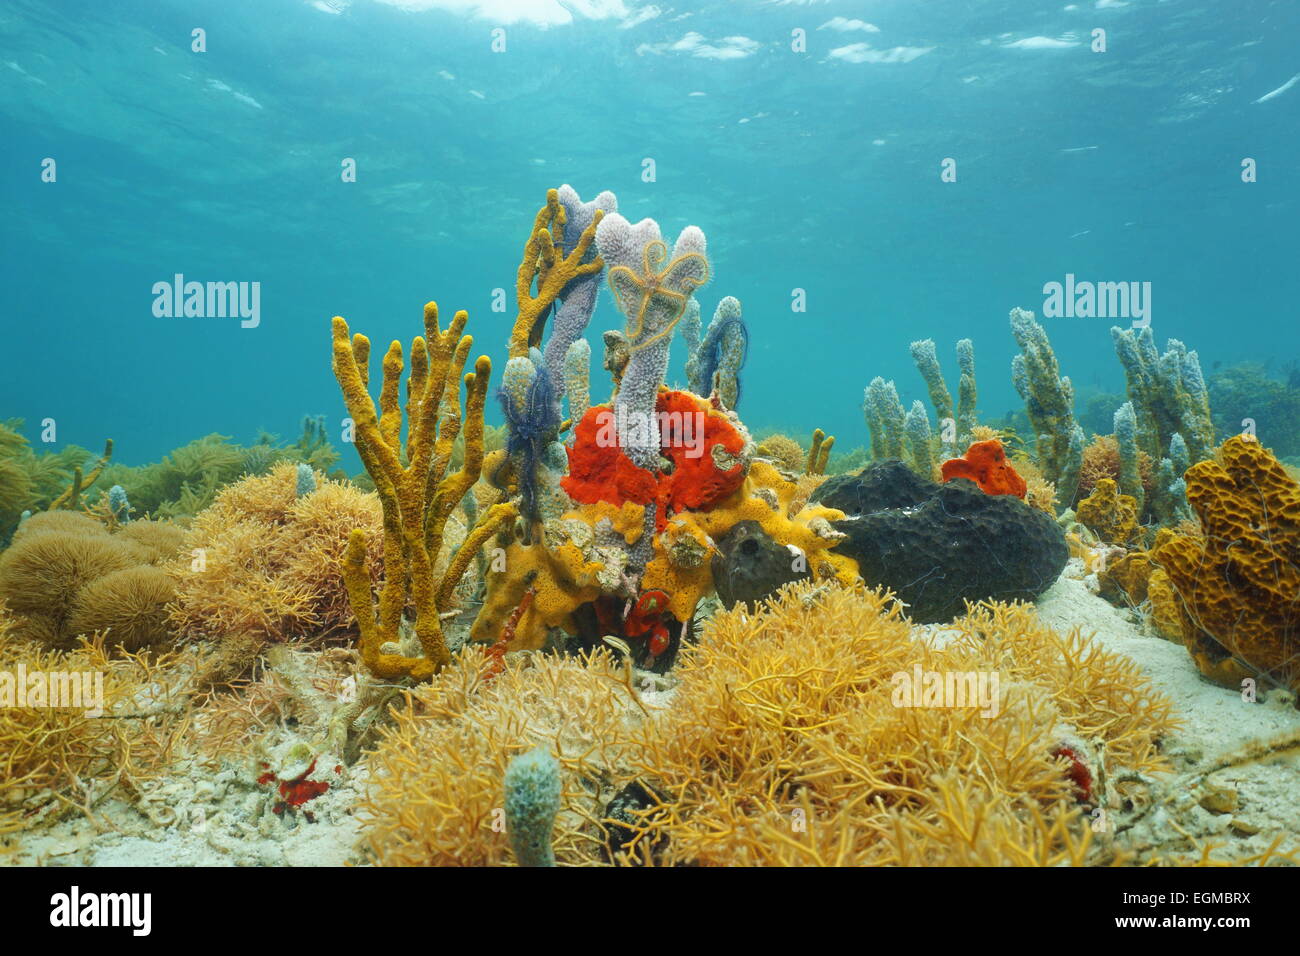 Colorful sea sponges underwater on seabed of the Caribbean sea Stock Photo